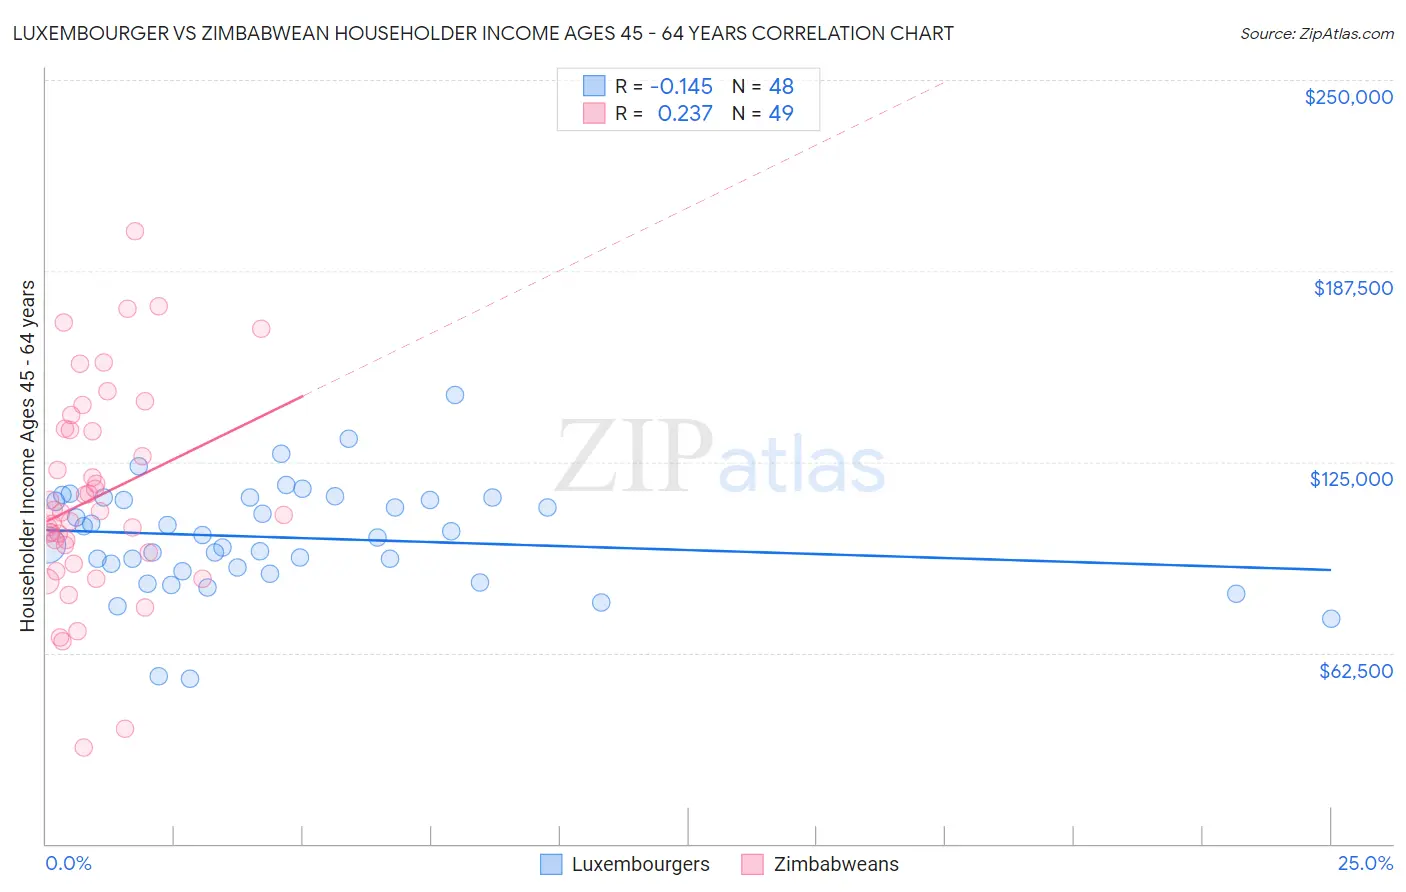 Luxembourger vs Zimbabwean Householder Income Ages 45 - 64 years